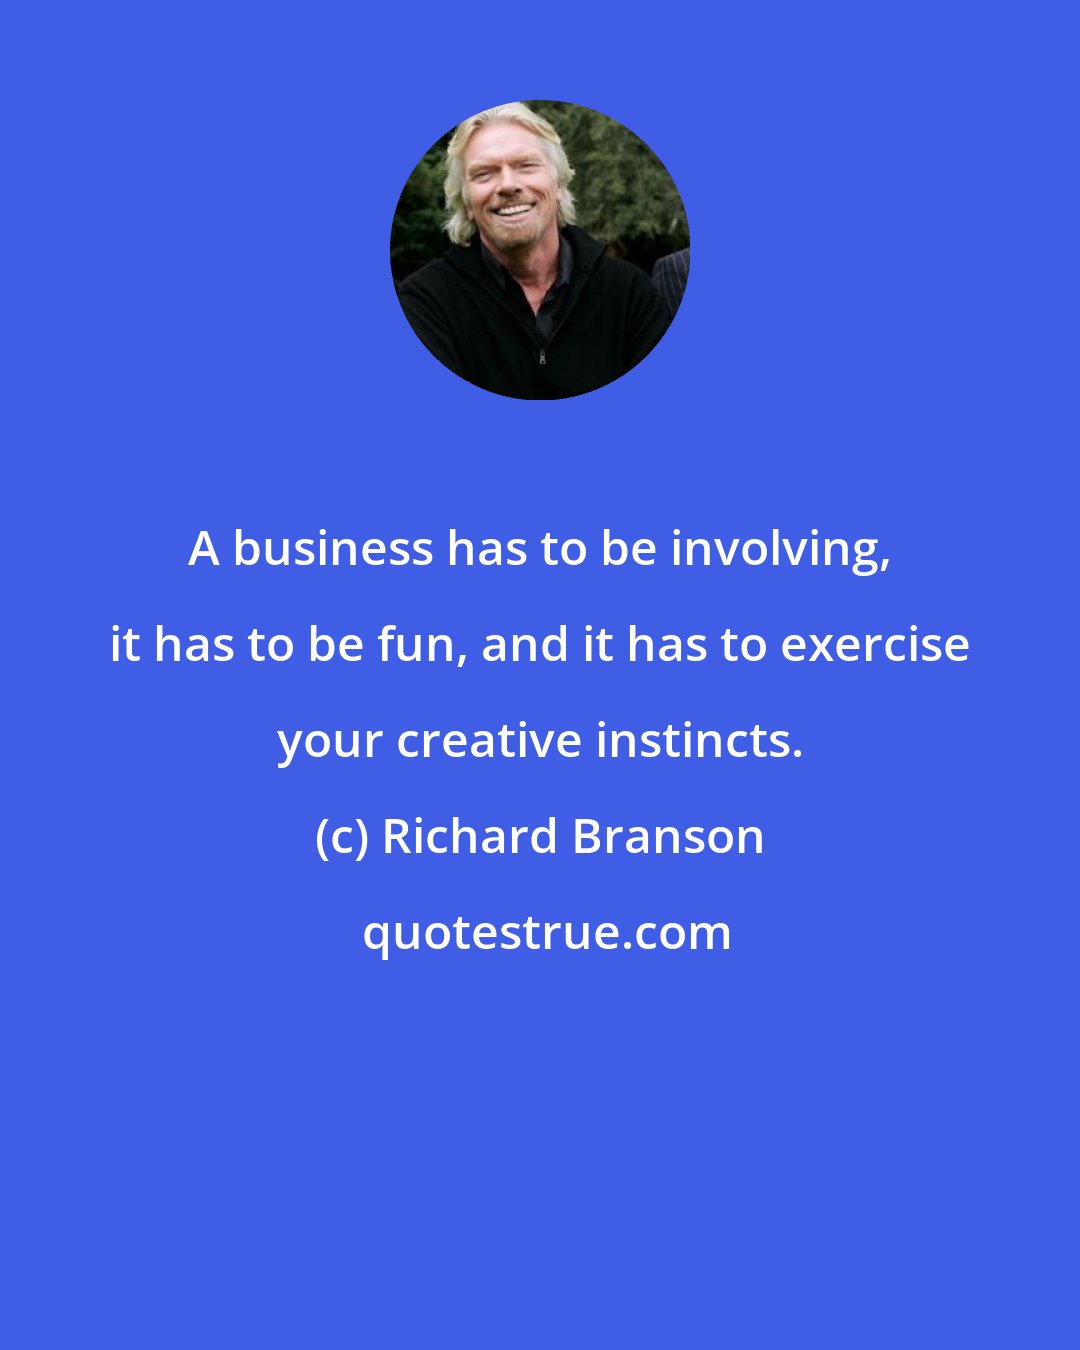 Richard Branson: A business has to be involving, it has to be fun, and it has to exercise your creative instincts.